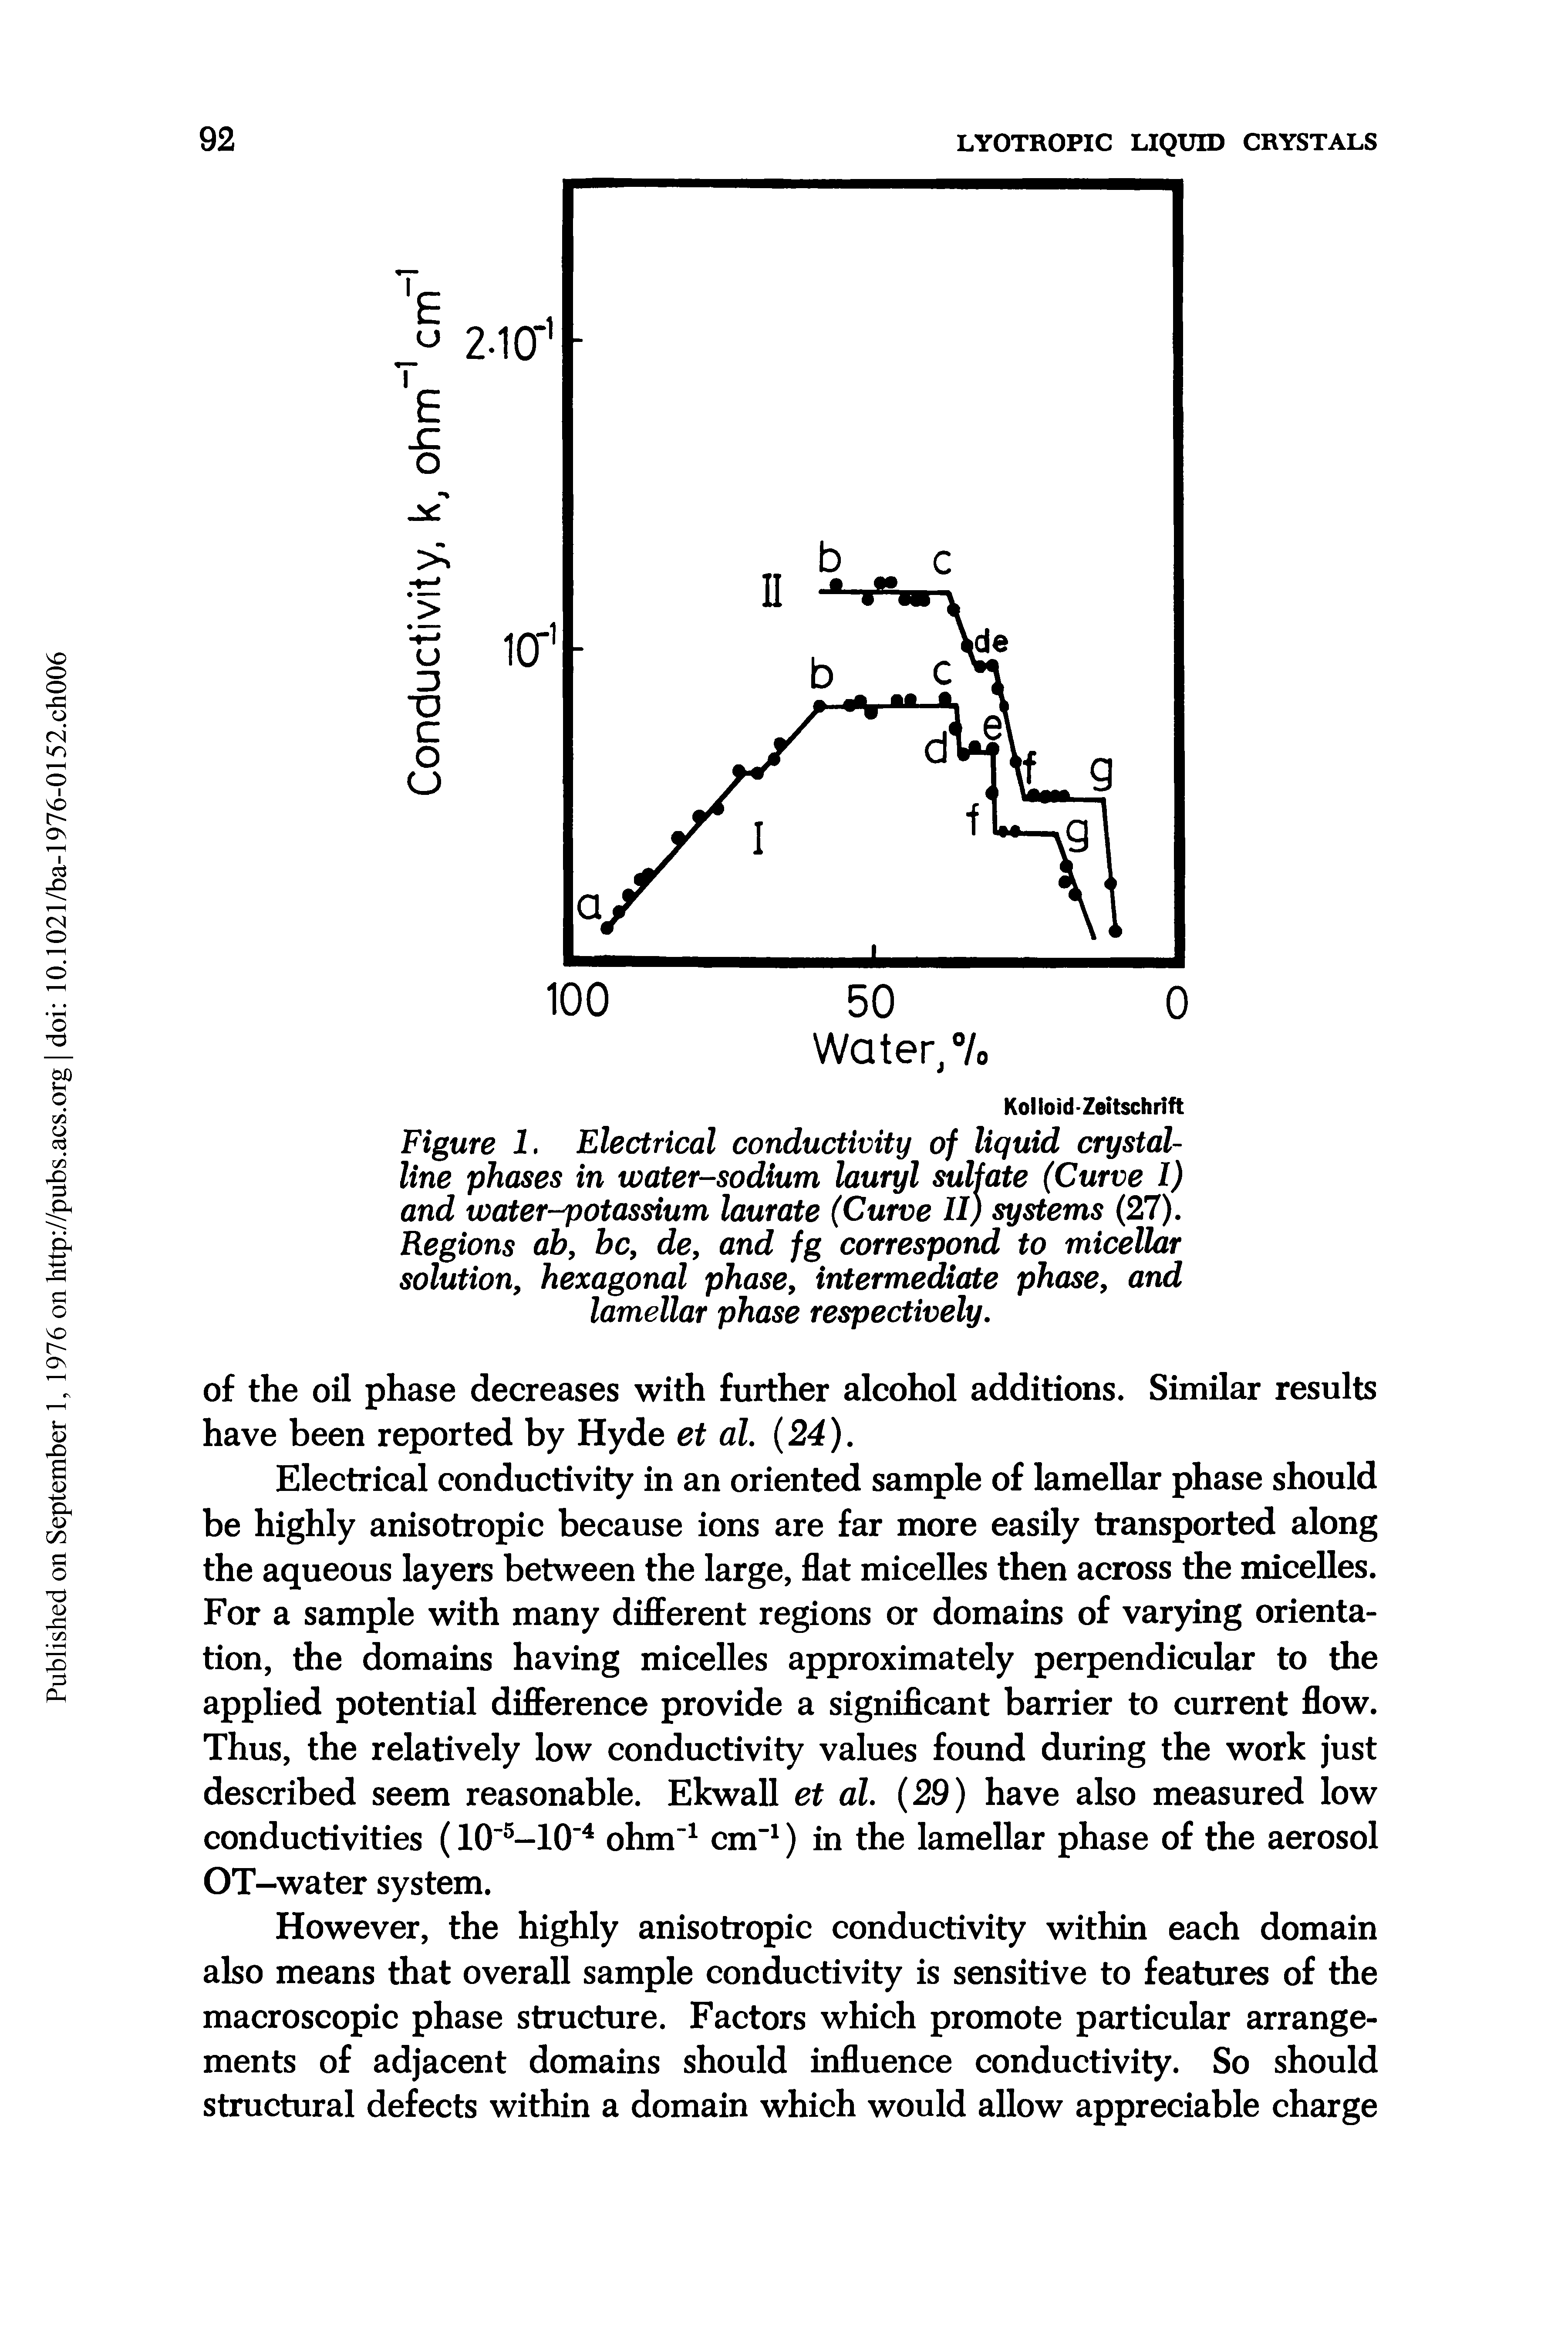 Figure 1. Electrical conductivity of liquid crystalline phases in water-sodium lauryl sulfate (Curve 1) and water-potassium laurate (Curve II) systems (27).